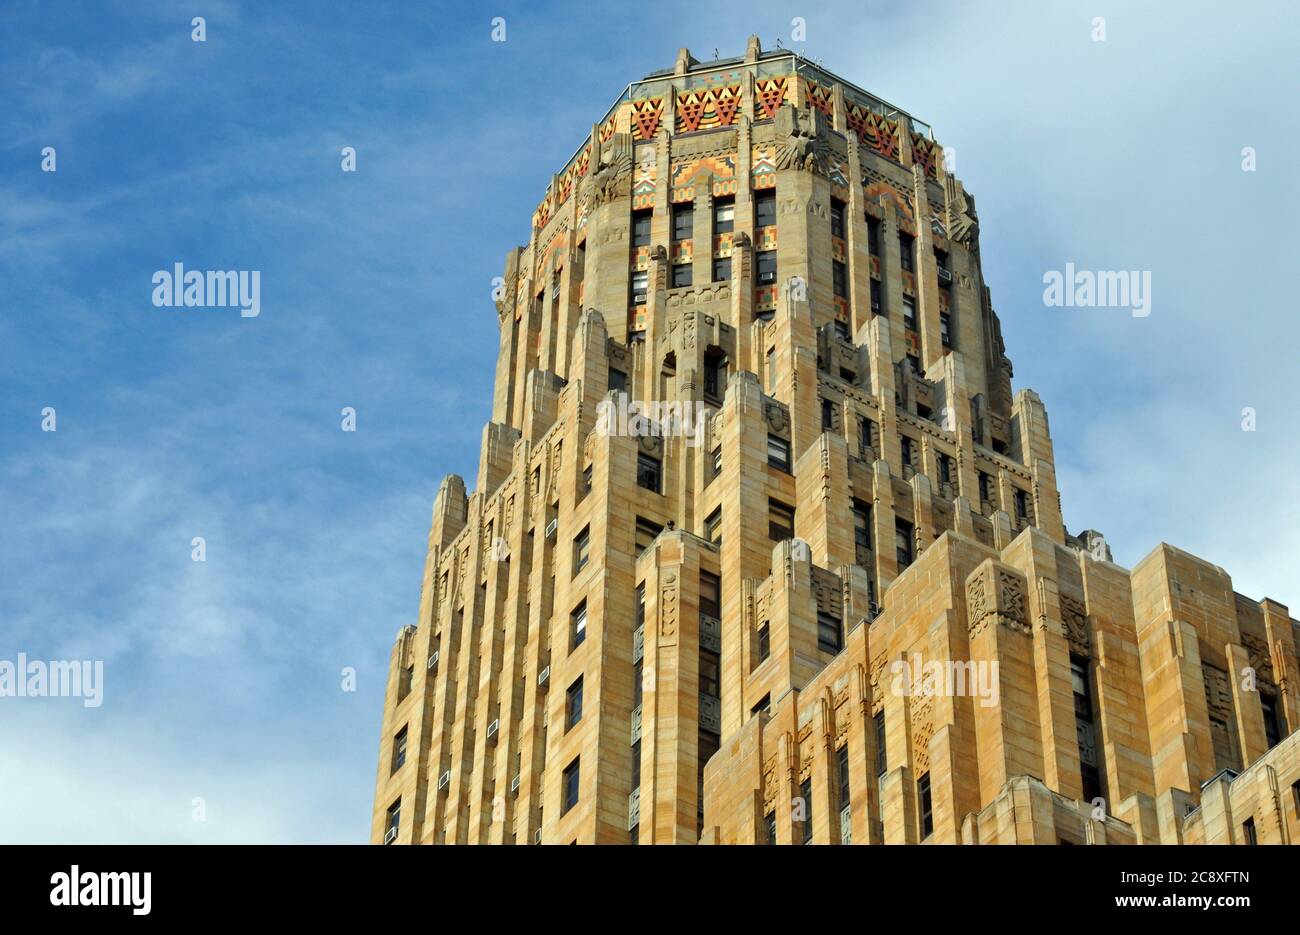 Completed in 1931, the Art Deco-style City Hall in Buffalo, New York, is one of the largest municipal buildings in the United States. Stock Photo